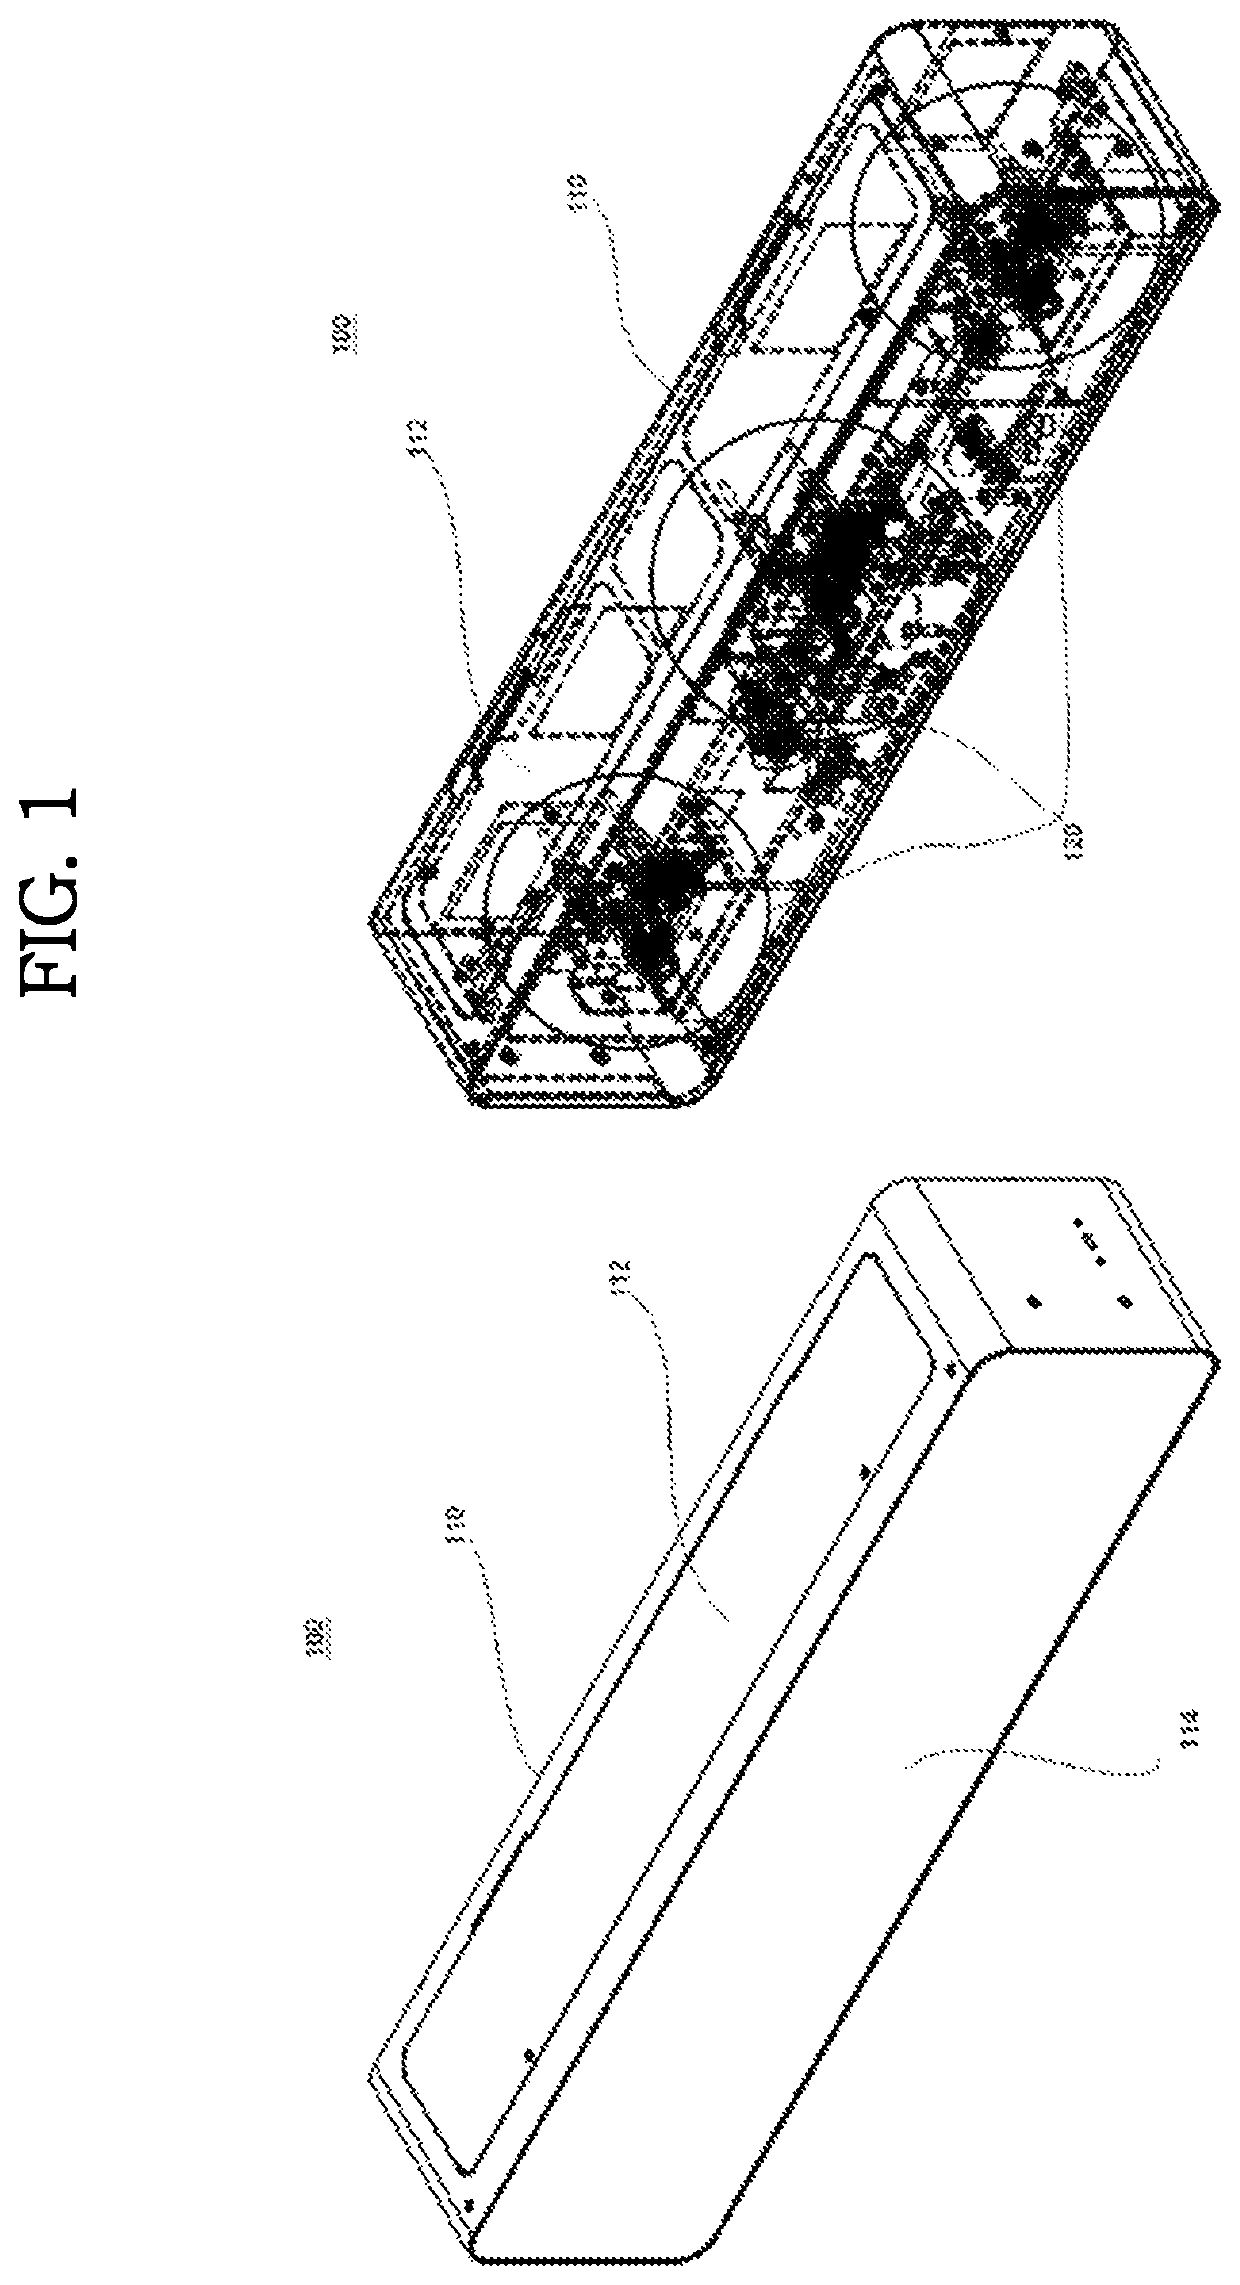 Imaging apparatus comprising image-capturing unit capable of capturing a time slice image